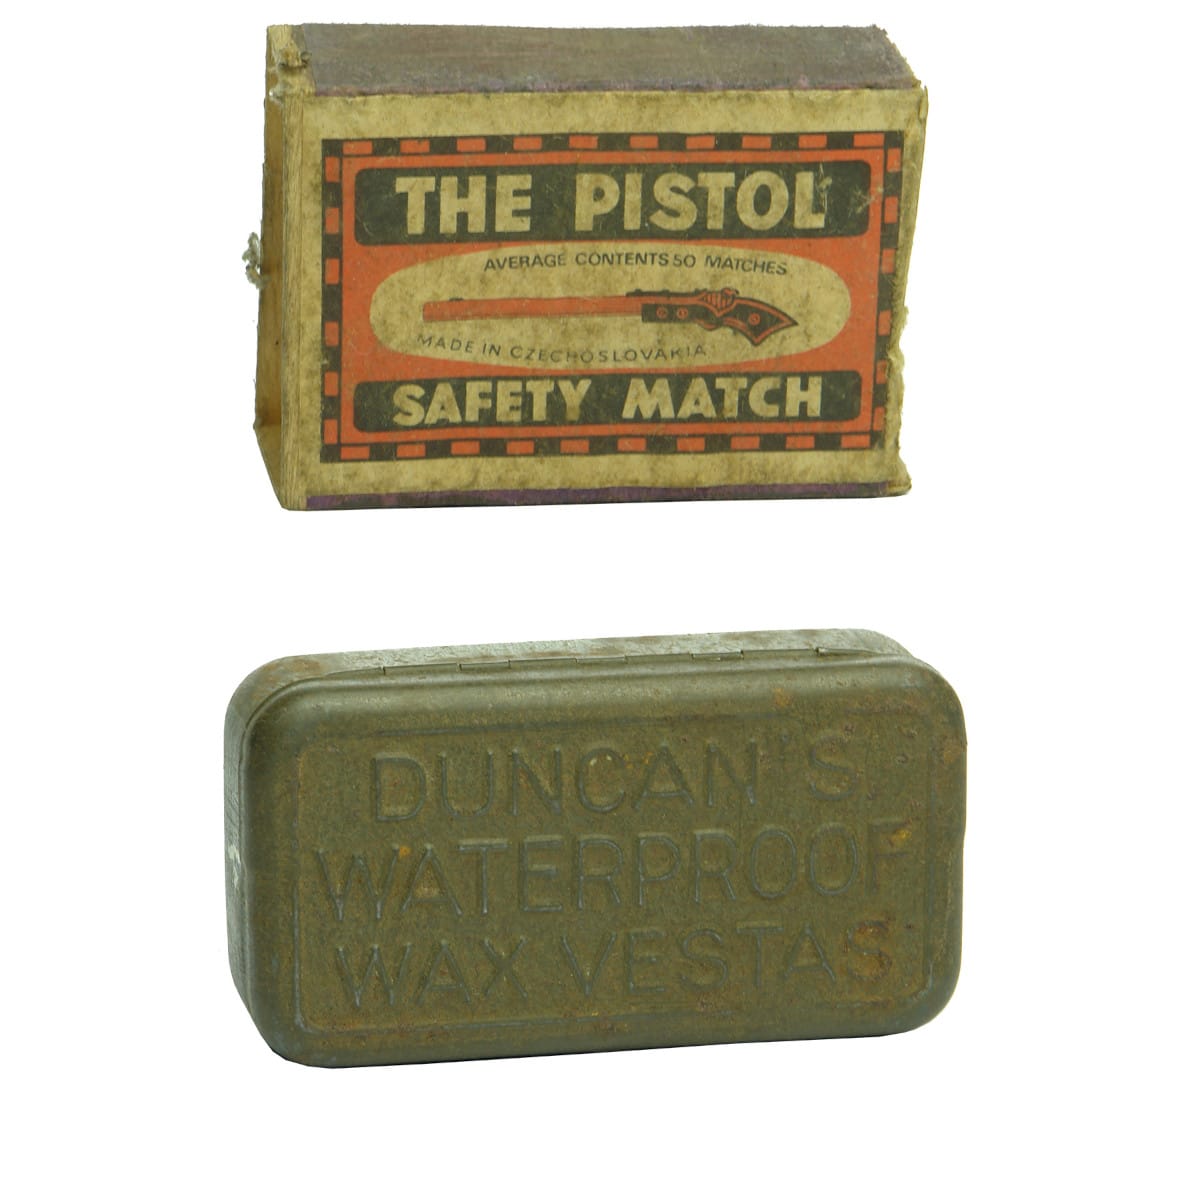 Tobacciana. The Pistol Safety Match Box and Duncan's Waterproof Vesta's tin case.